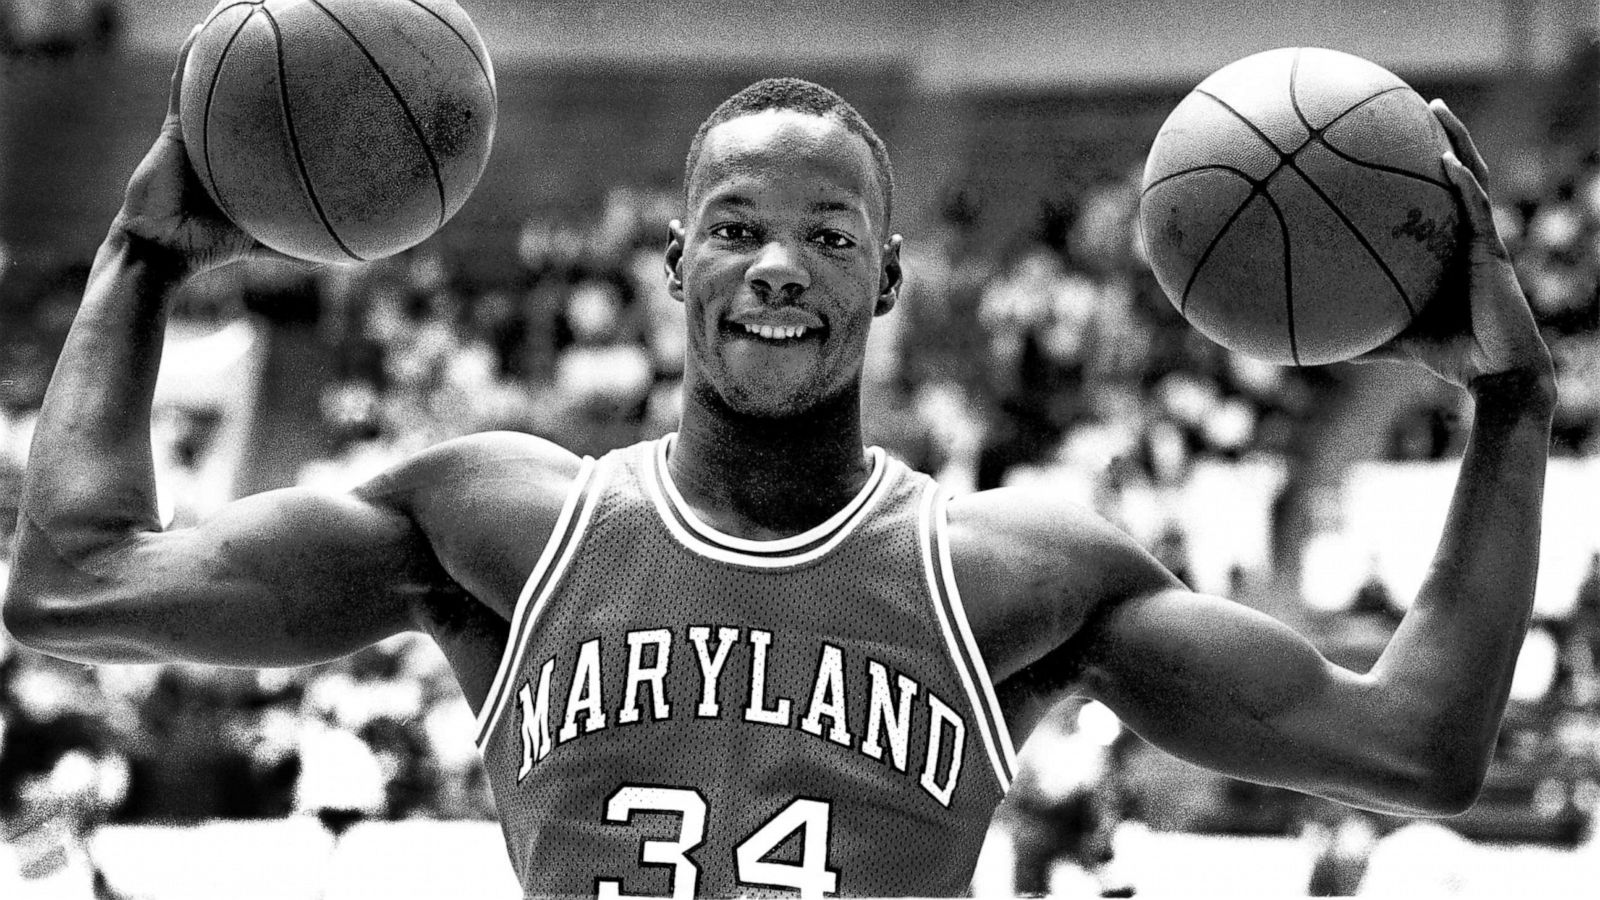 Len Bias' mother says family is keeping basketball star's memory